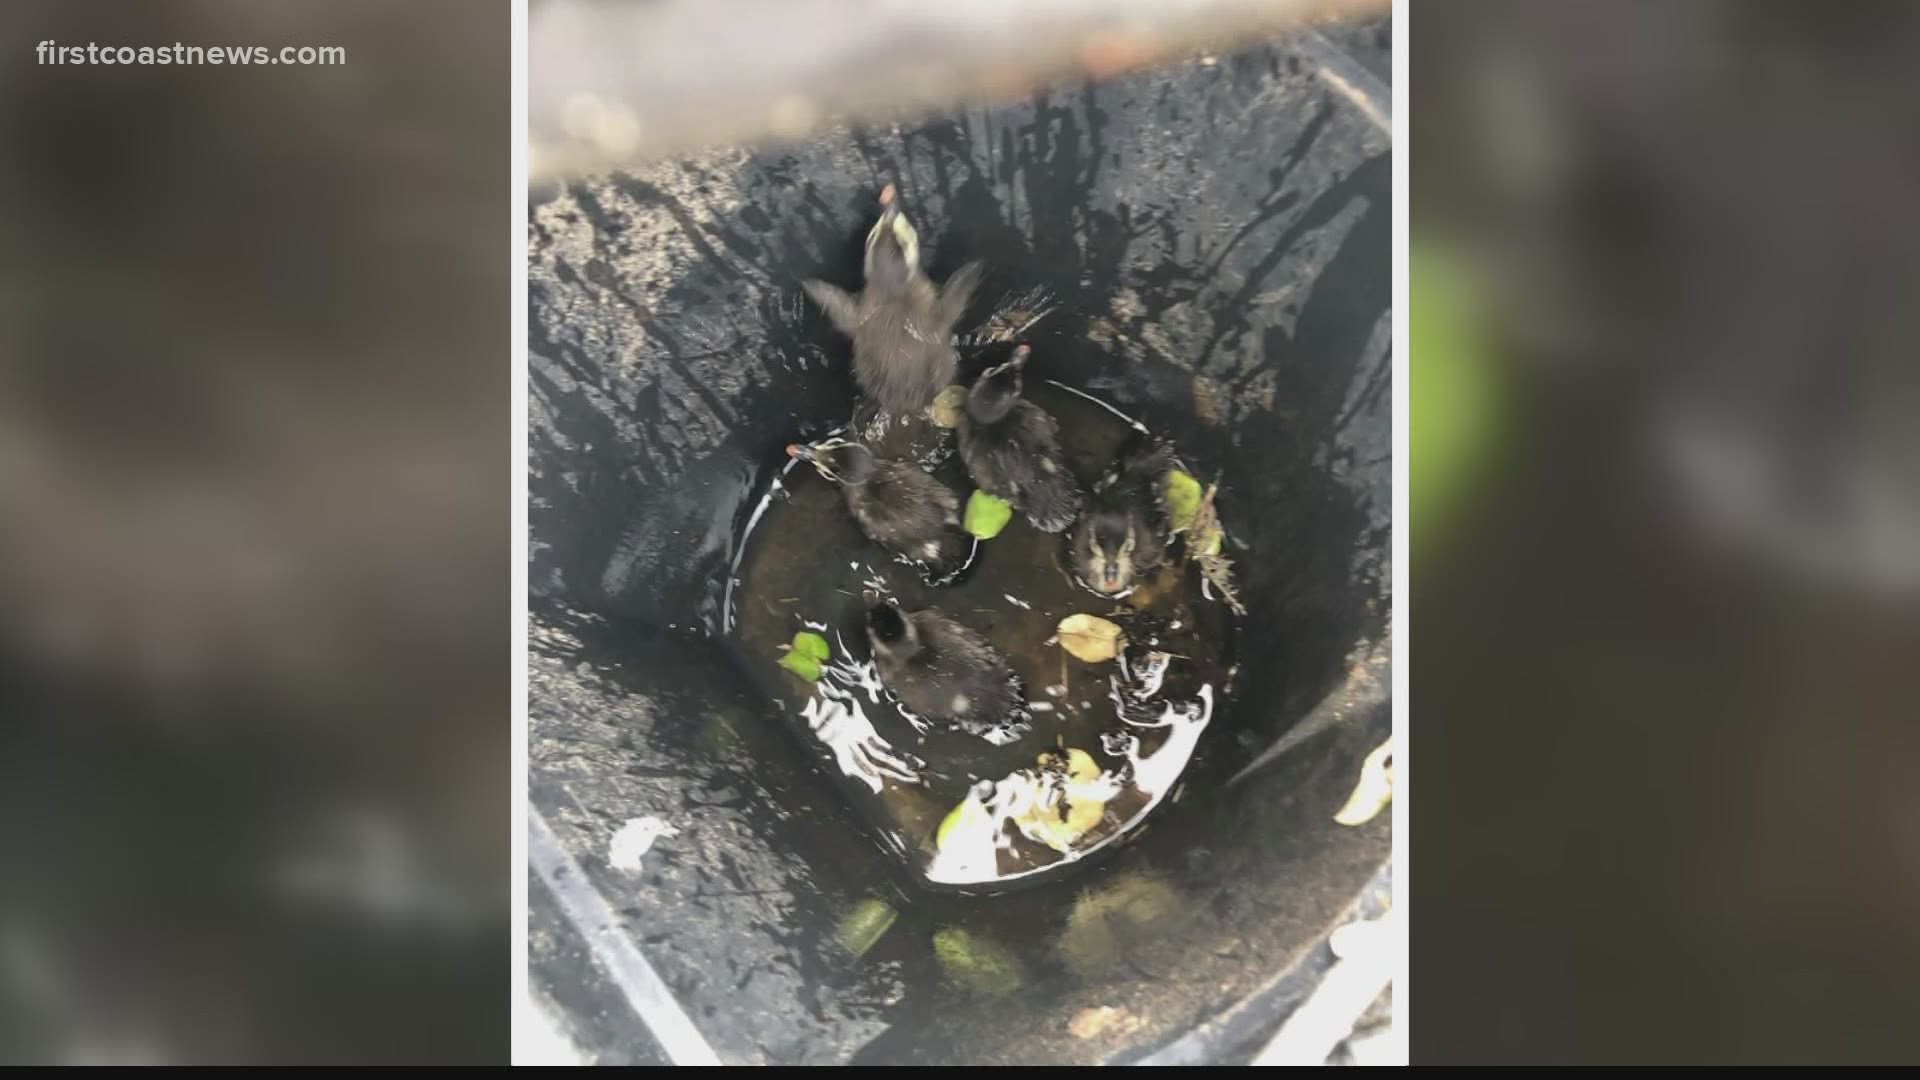 Five ducklings were rescued from the storm drain Monday morning.